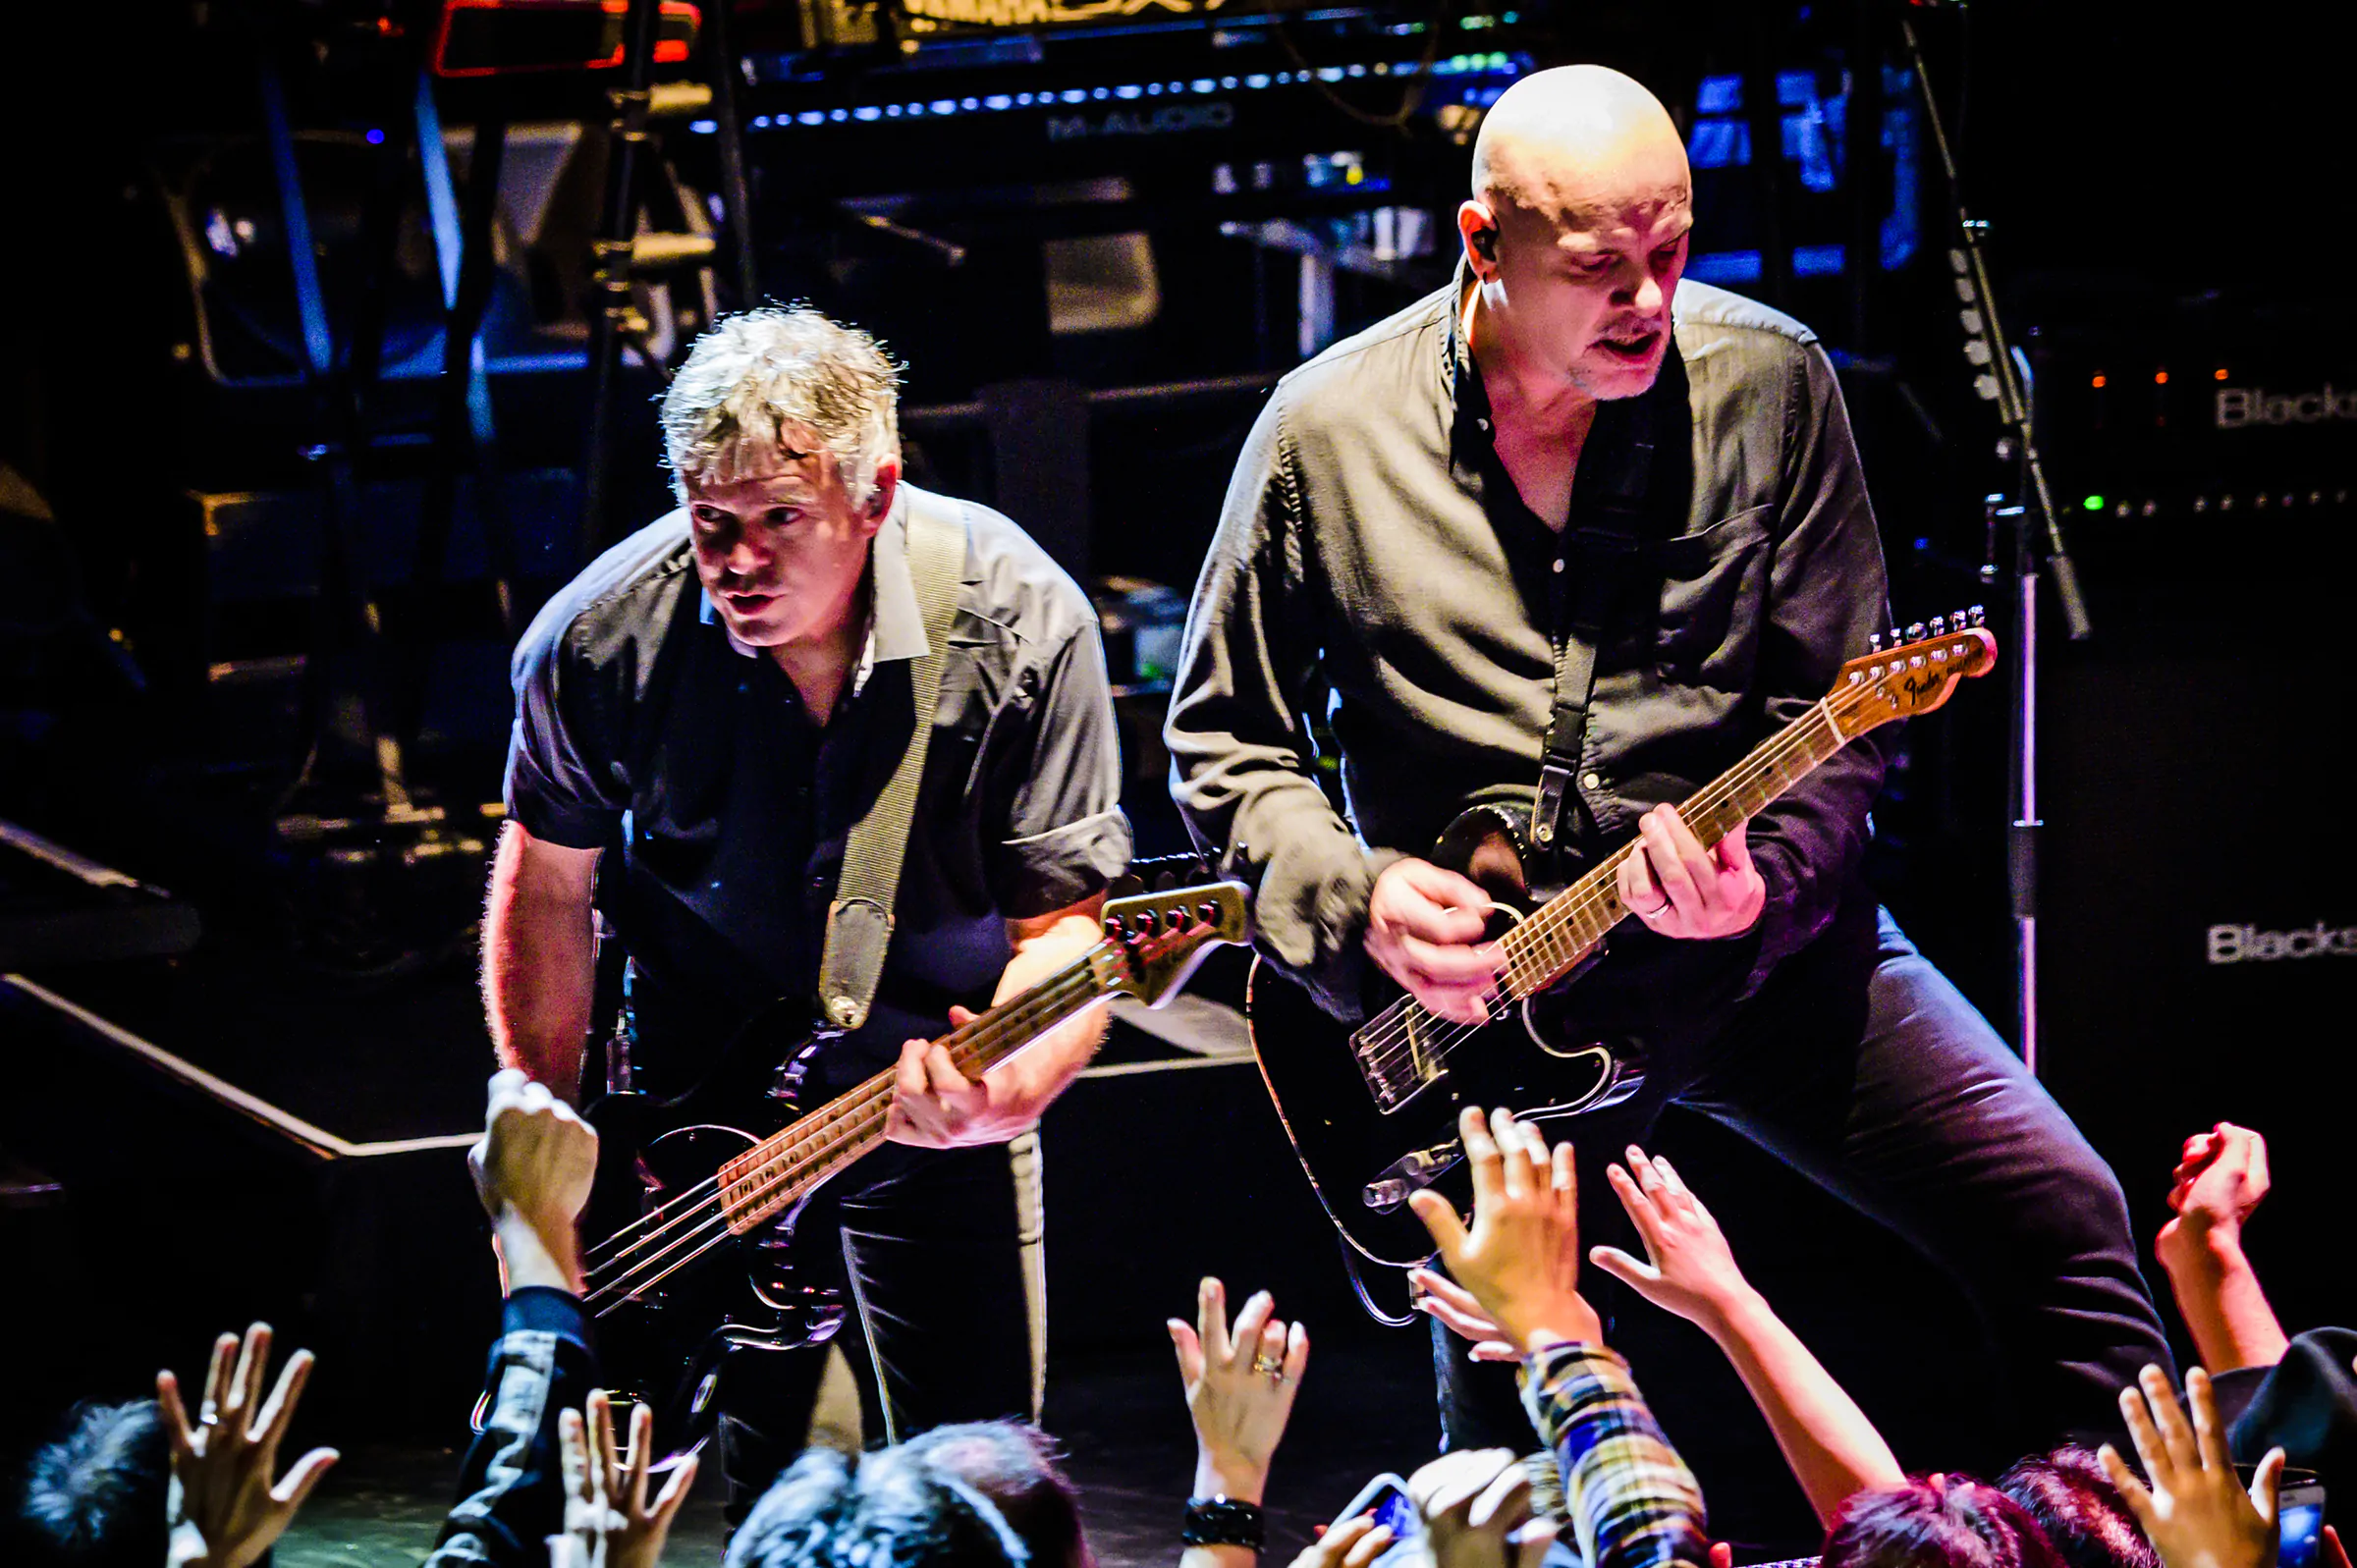 THE STRANGLERS announce rescheduling of 2021 UK tour to 2022